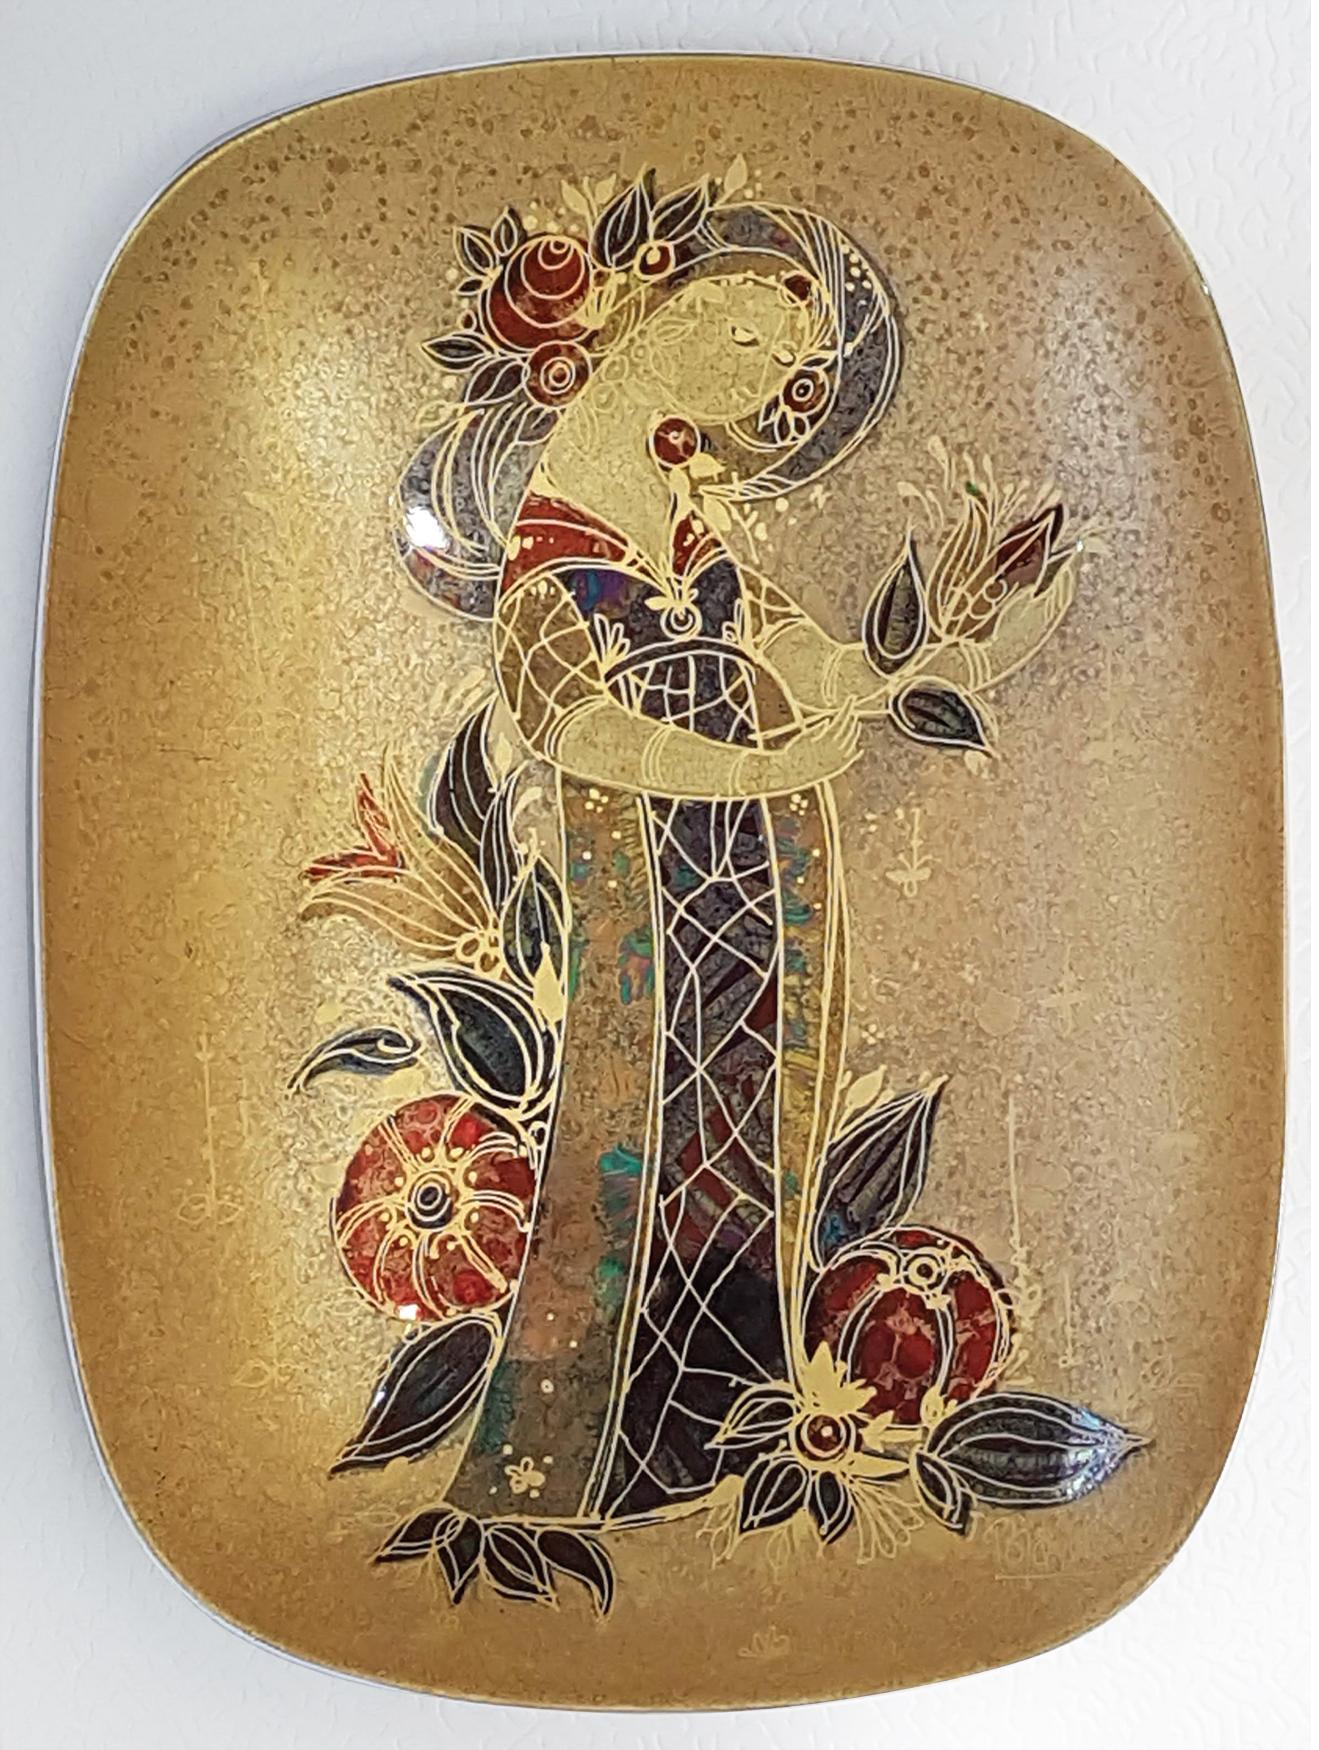 A magnificent hand painted Bjørn Wiinblad Rosenthal platter made for the studio line ceramics.
Signed Bjorn Wiinblad. Decorated in 24-karat gold with an iridescent pattern. A fantastic collector’s item.

Please note: This plates are heavy,